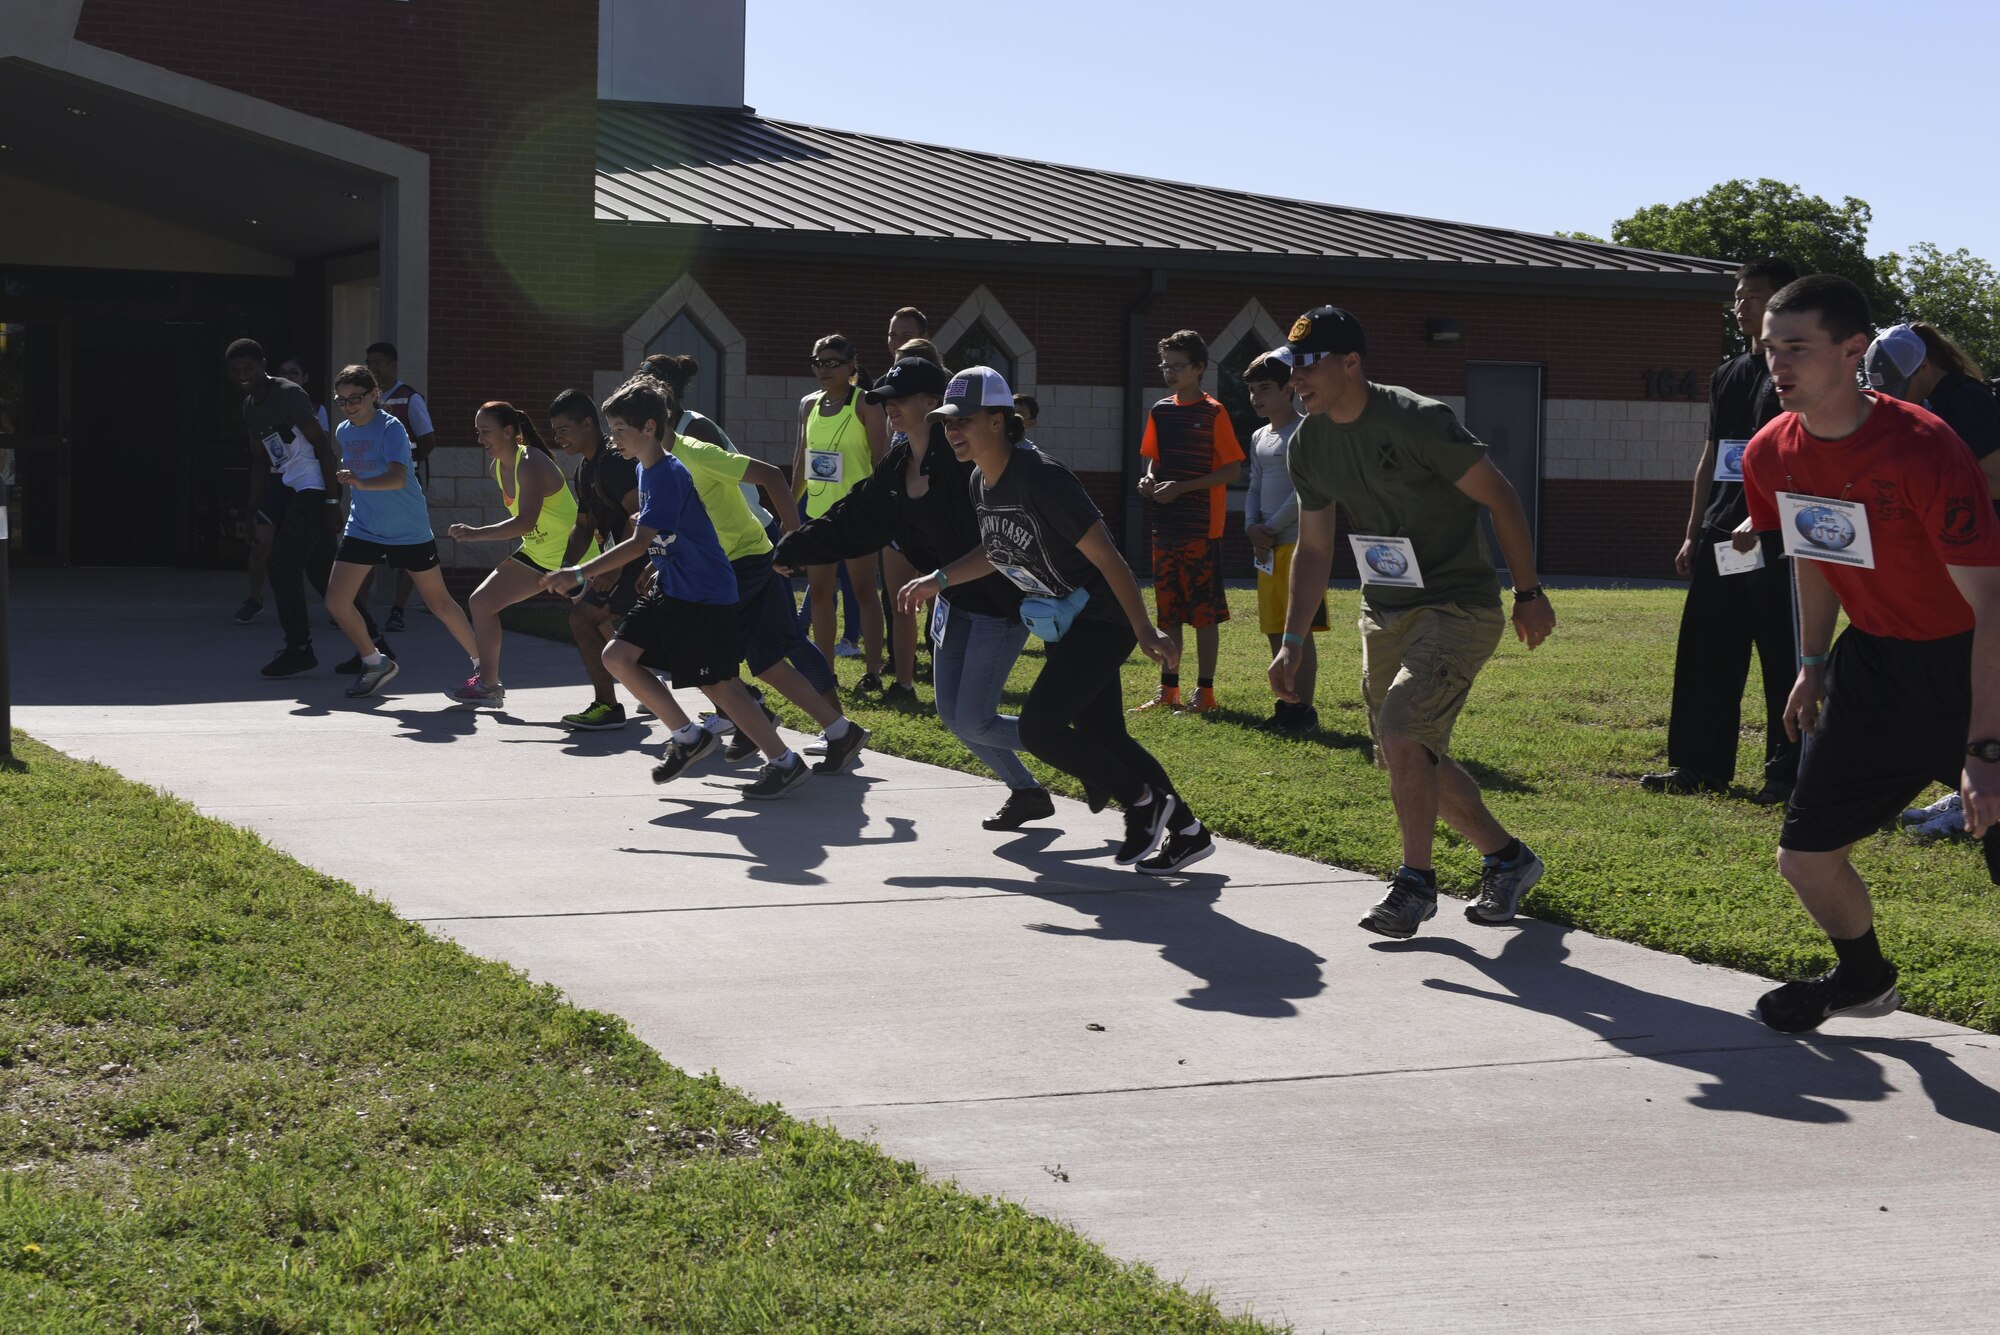 Participants of the 6th annual Sexual Assault Response Coordinator Challenge sprint for the first objective at the Taylor Chapel on Goodfellow Air Force Base, Texas, April 30, 2016. The challenge raised awareness of Sexual Assault Prevention and Response through engaging participants in games and riddles. (U.S. Air Force photo by Airman 1st Class Chase Sousa/Released)